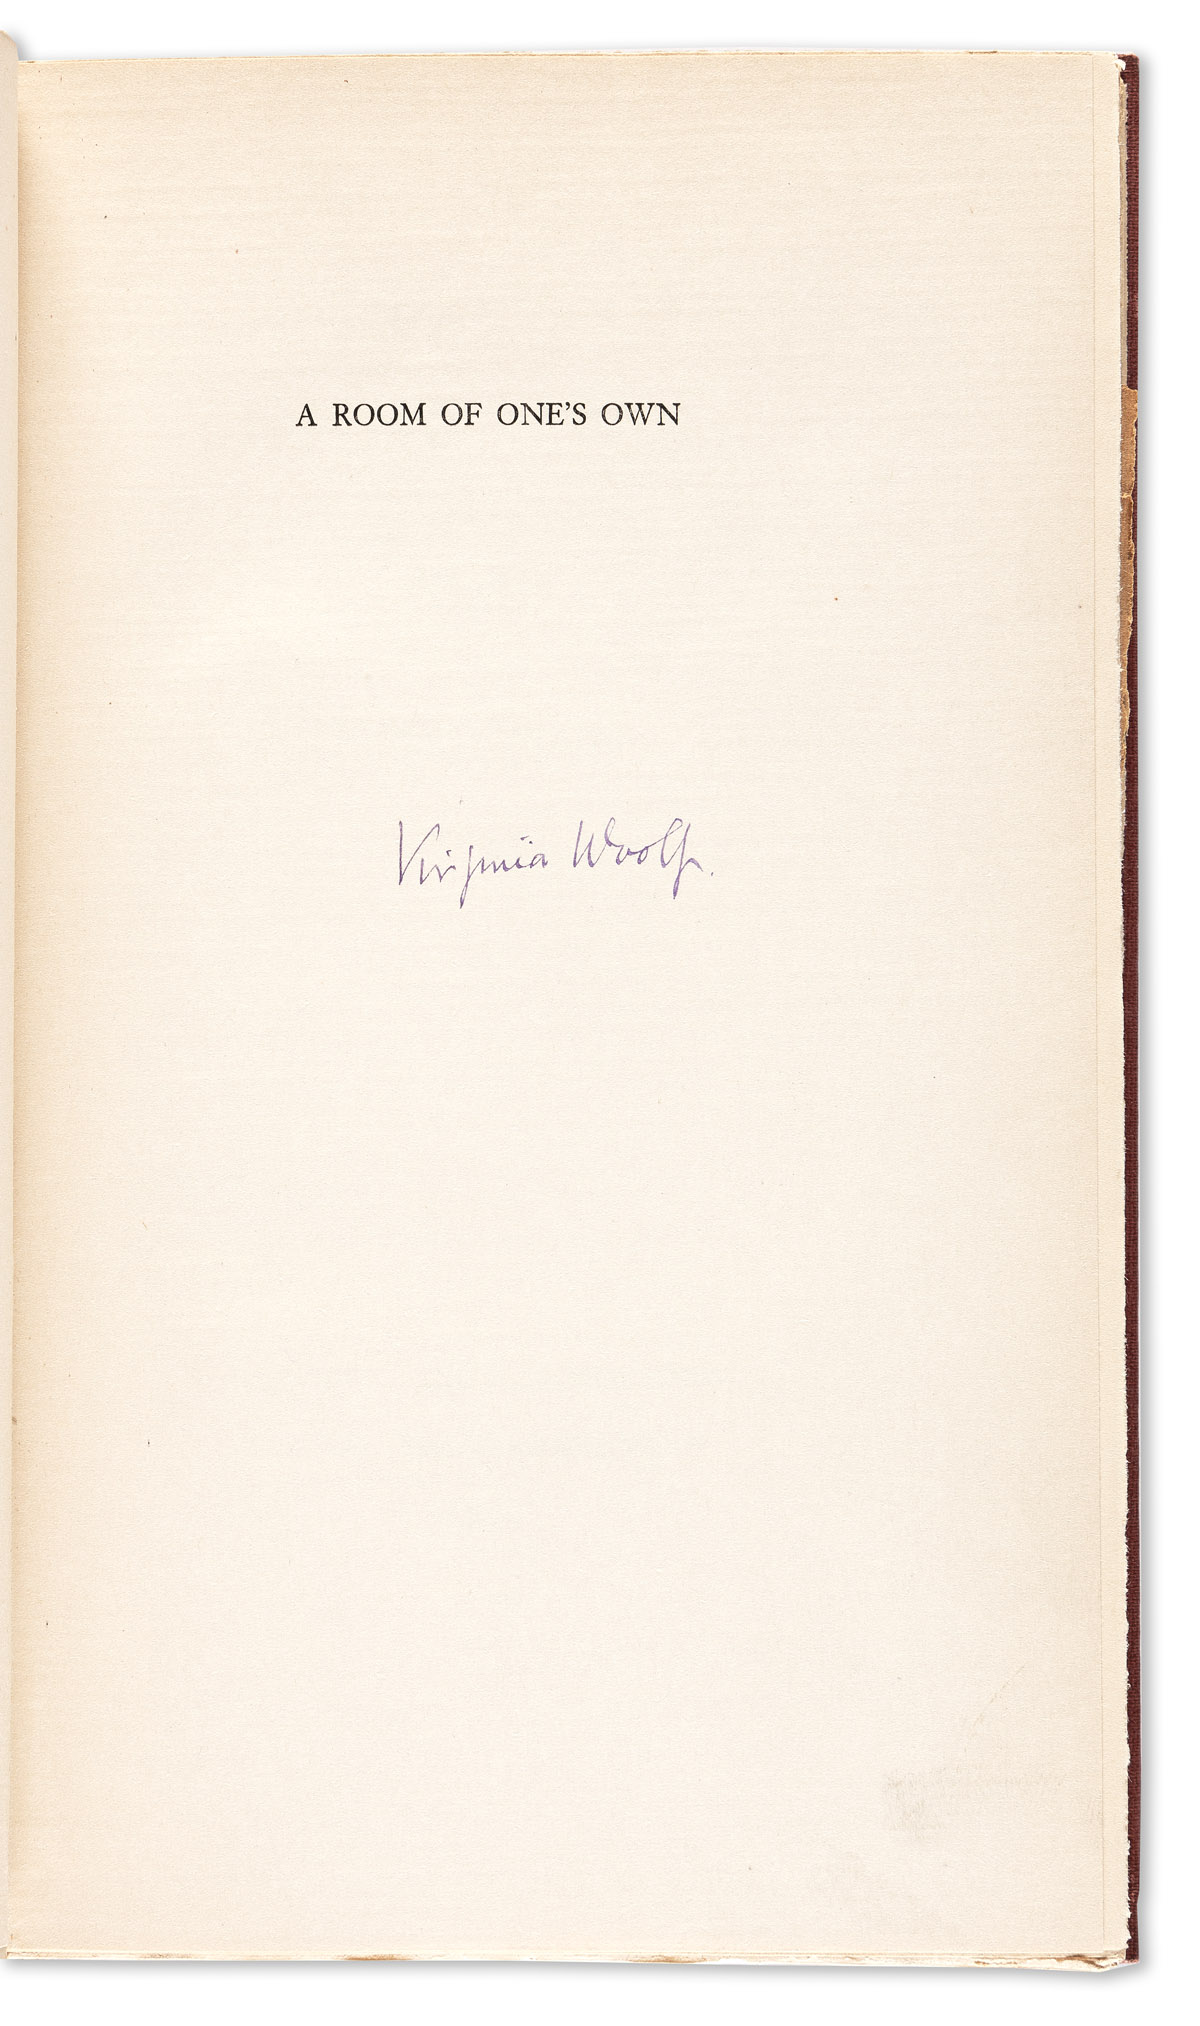 Woolf, Virginia (1882-1941) A Room of Ones Own, Signed Limited Edition.